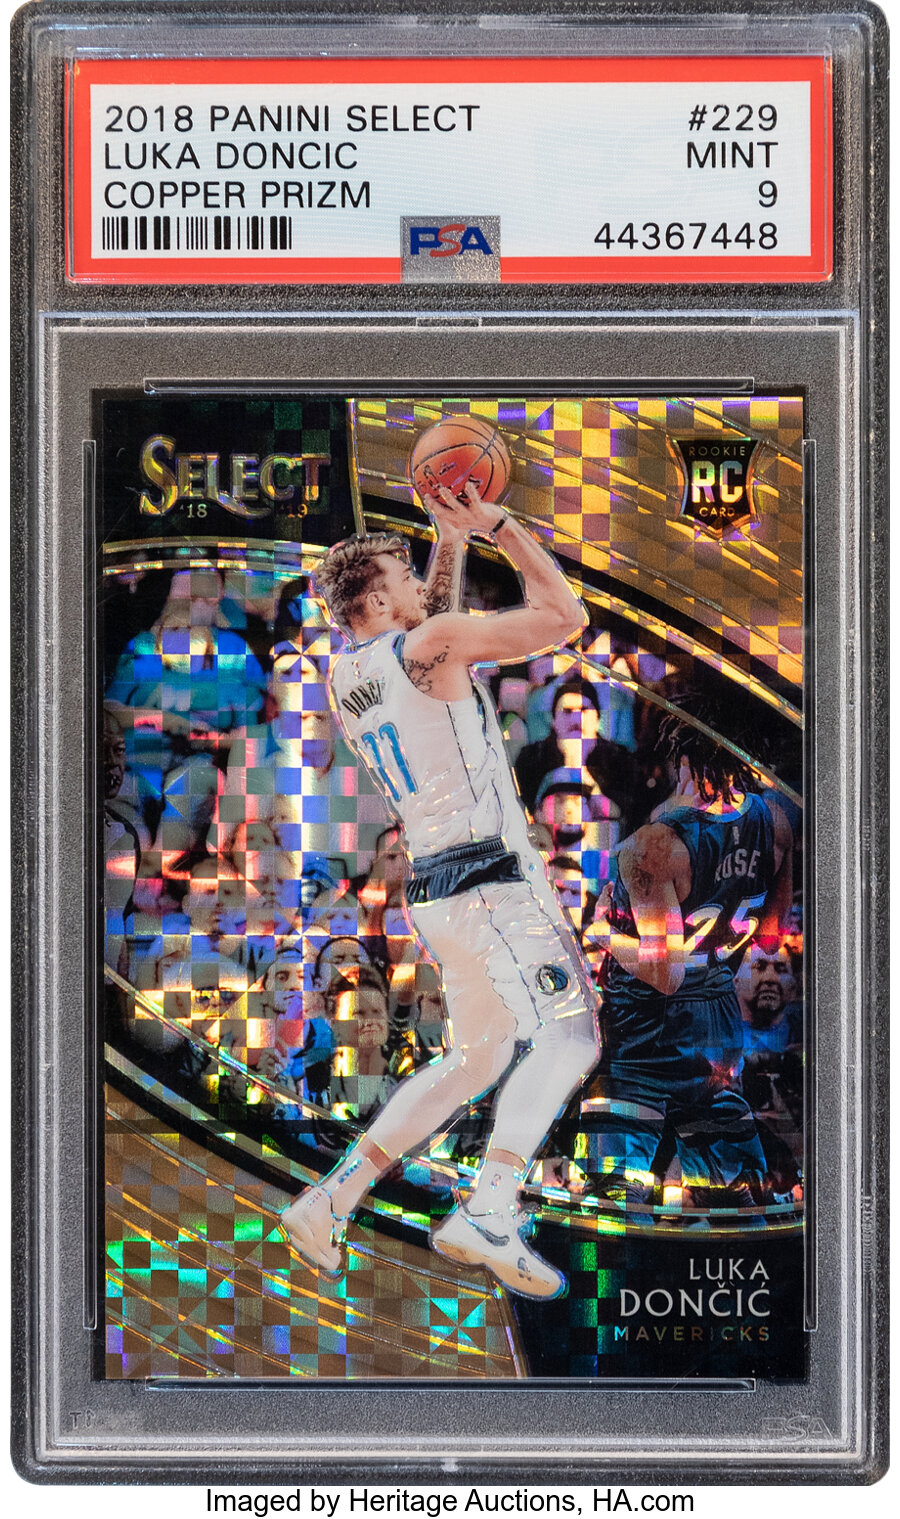 2018 Panini Select Luka Doncic (Courtside-Copper) Rookie #229 PSA Mint 9 - #'d 51/60